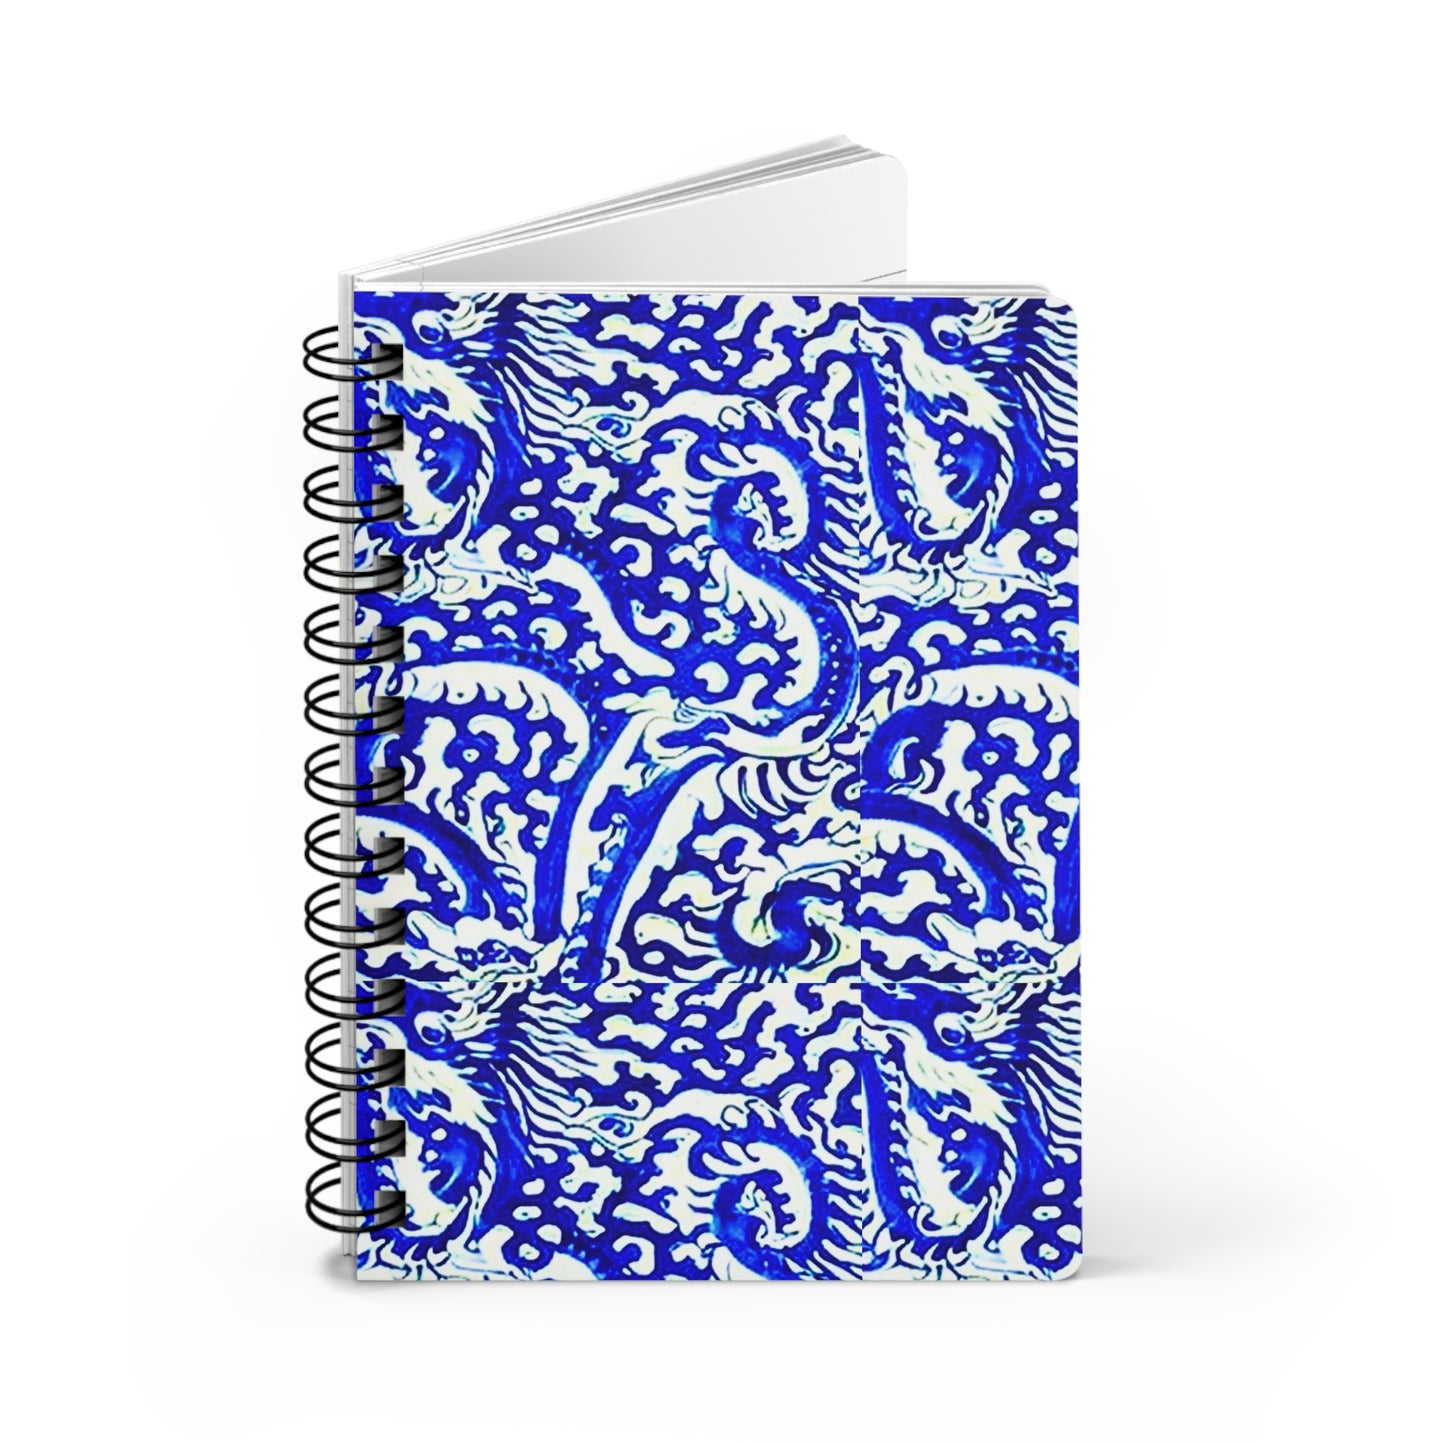 Sea of Chinese Dragons Ming Dynasty Blue and White Porcelain Pattern Writing Sketch Inspiration Spiral Bound Journal